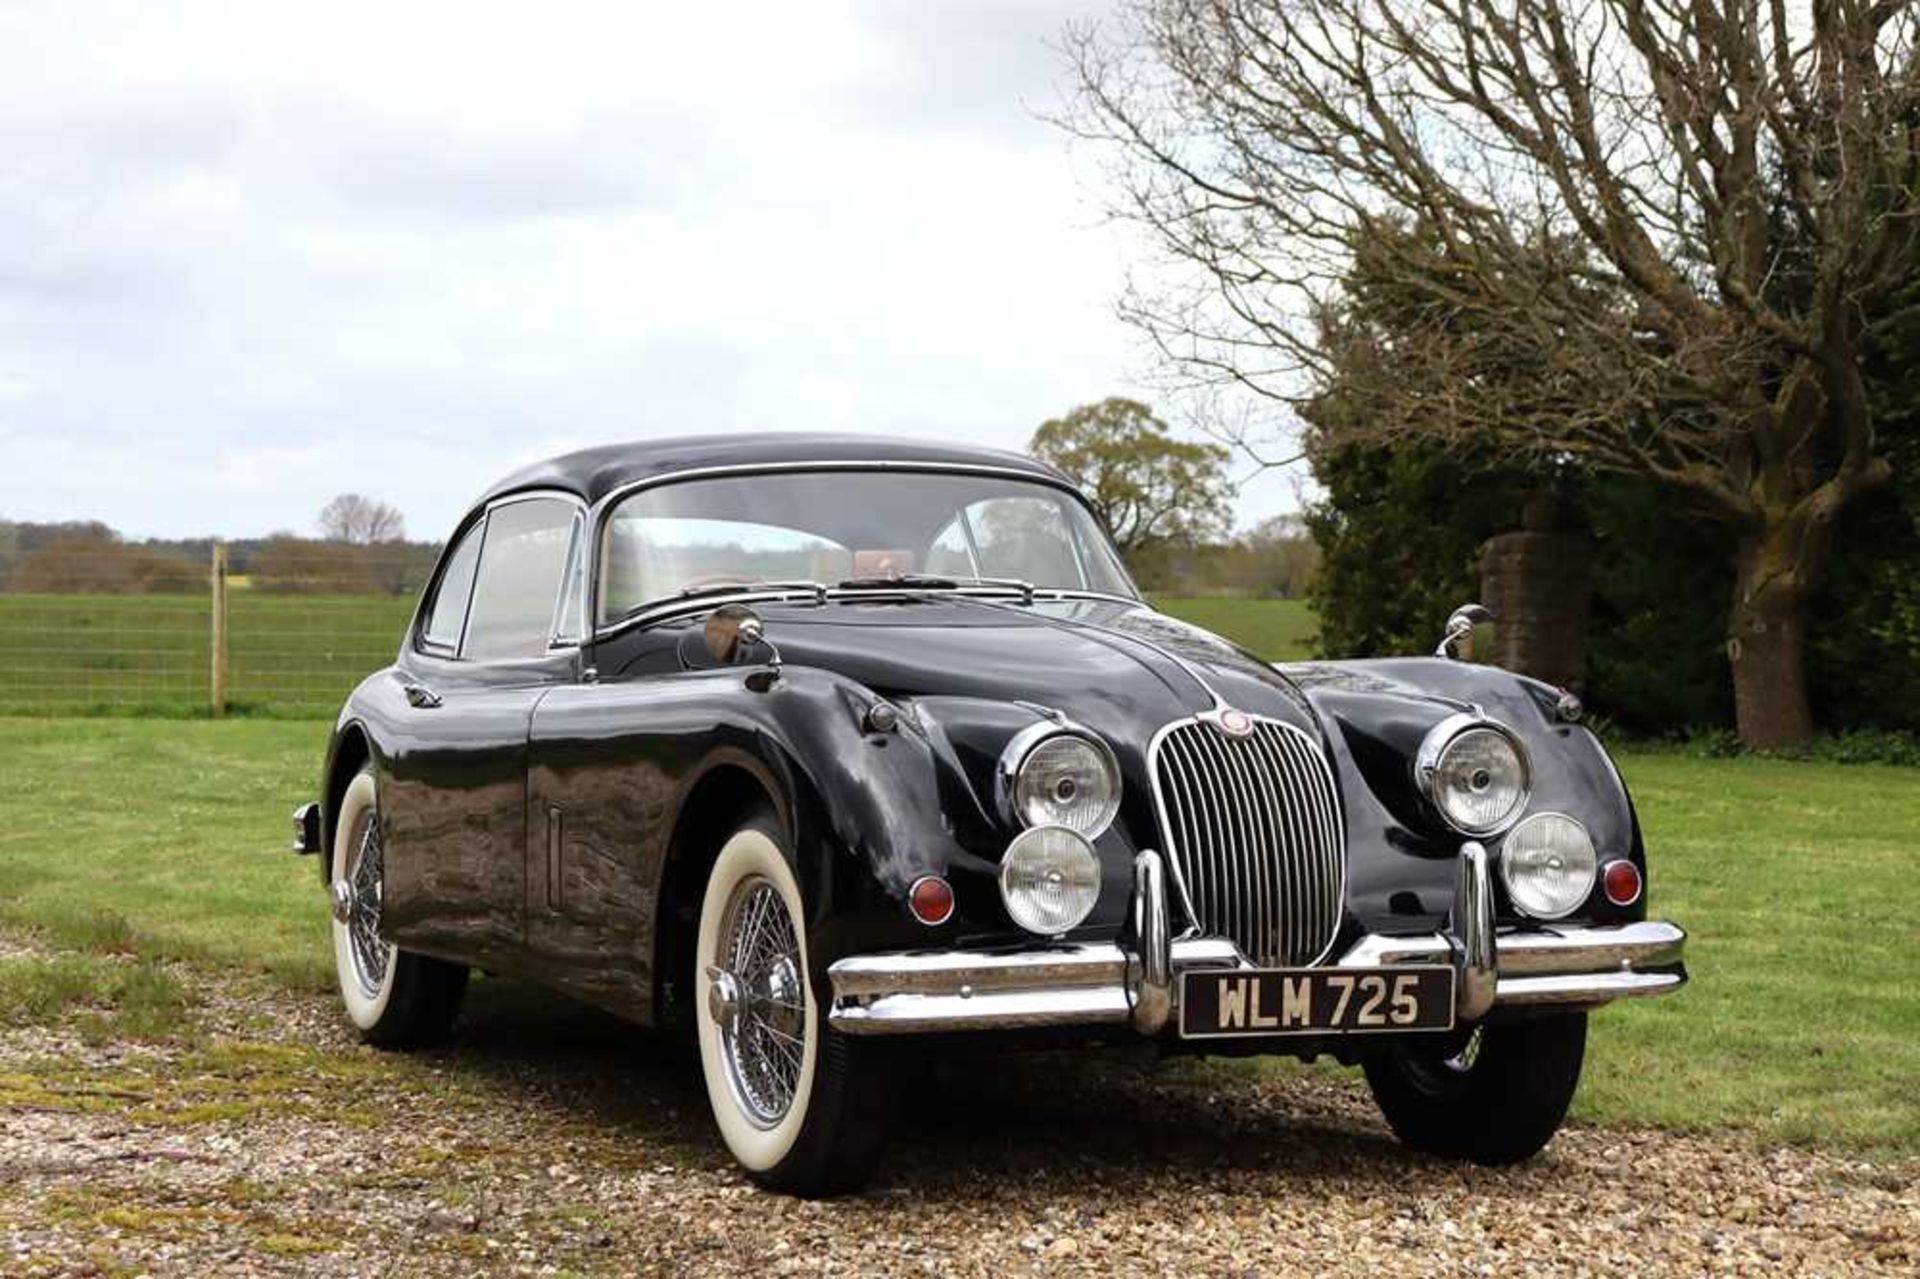 1959 Jaguar XK 150 Fixed Head Coupe 1 of just 1,368 RHD examples made - Image 3 of 49